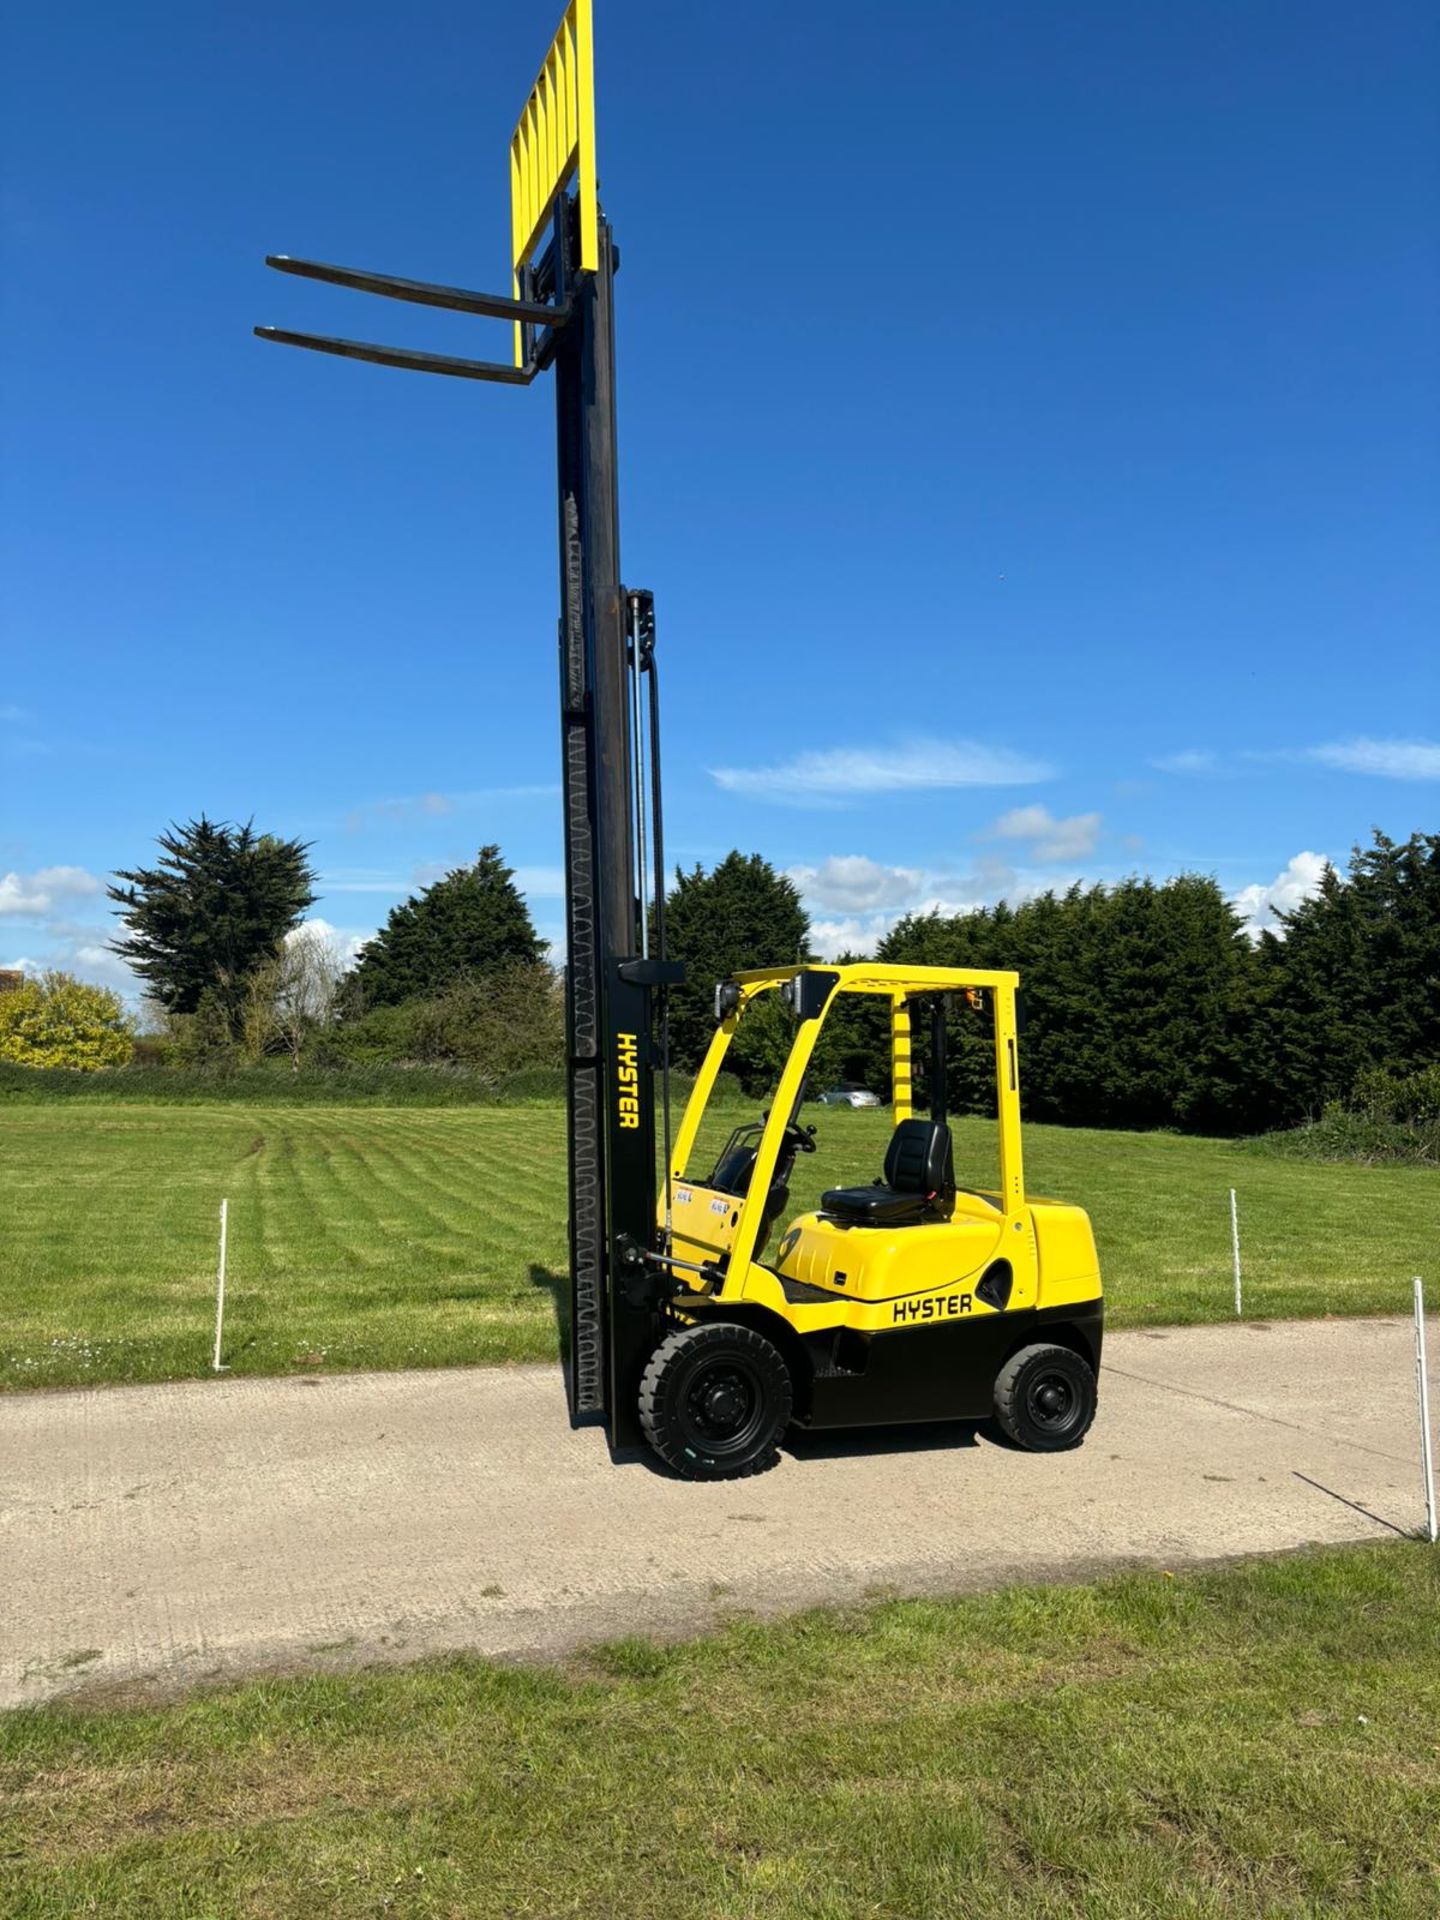 2018, HYSTER - Forklift Truck - Image 2 of 9